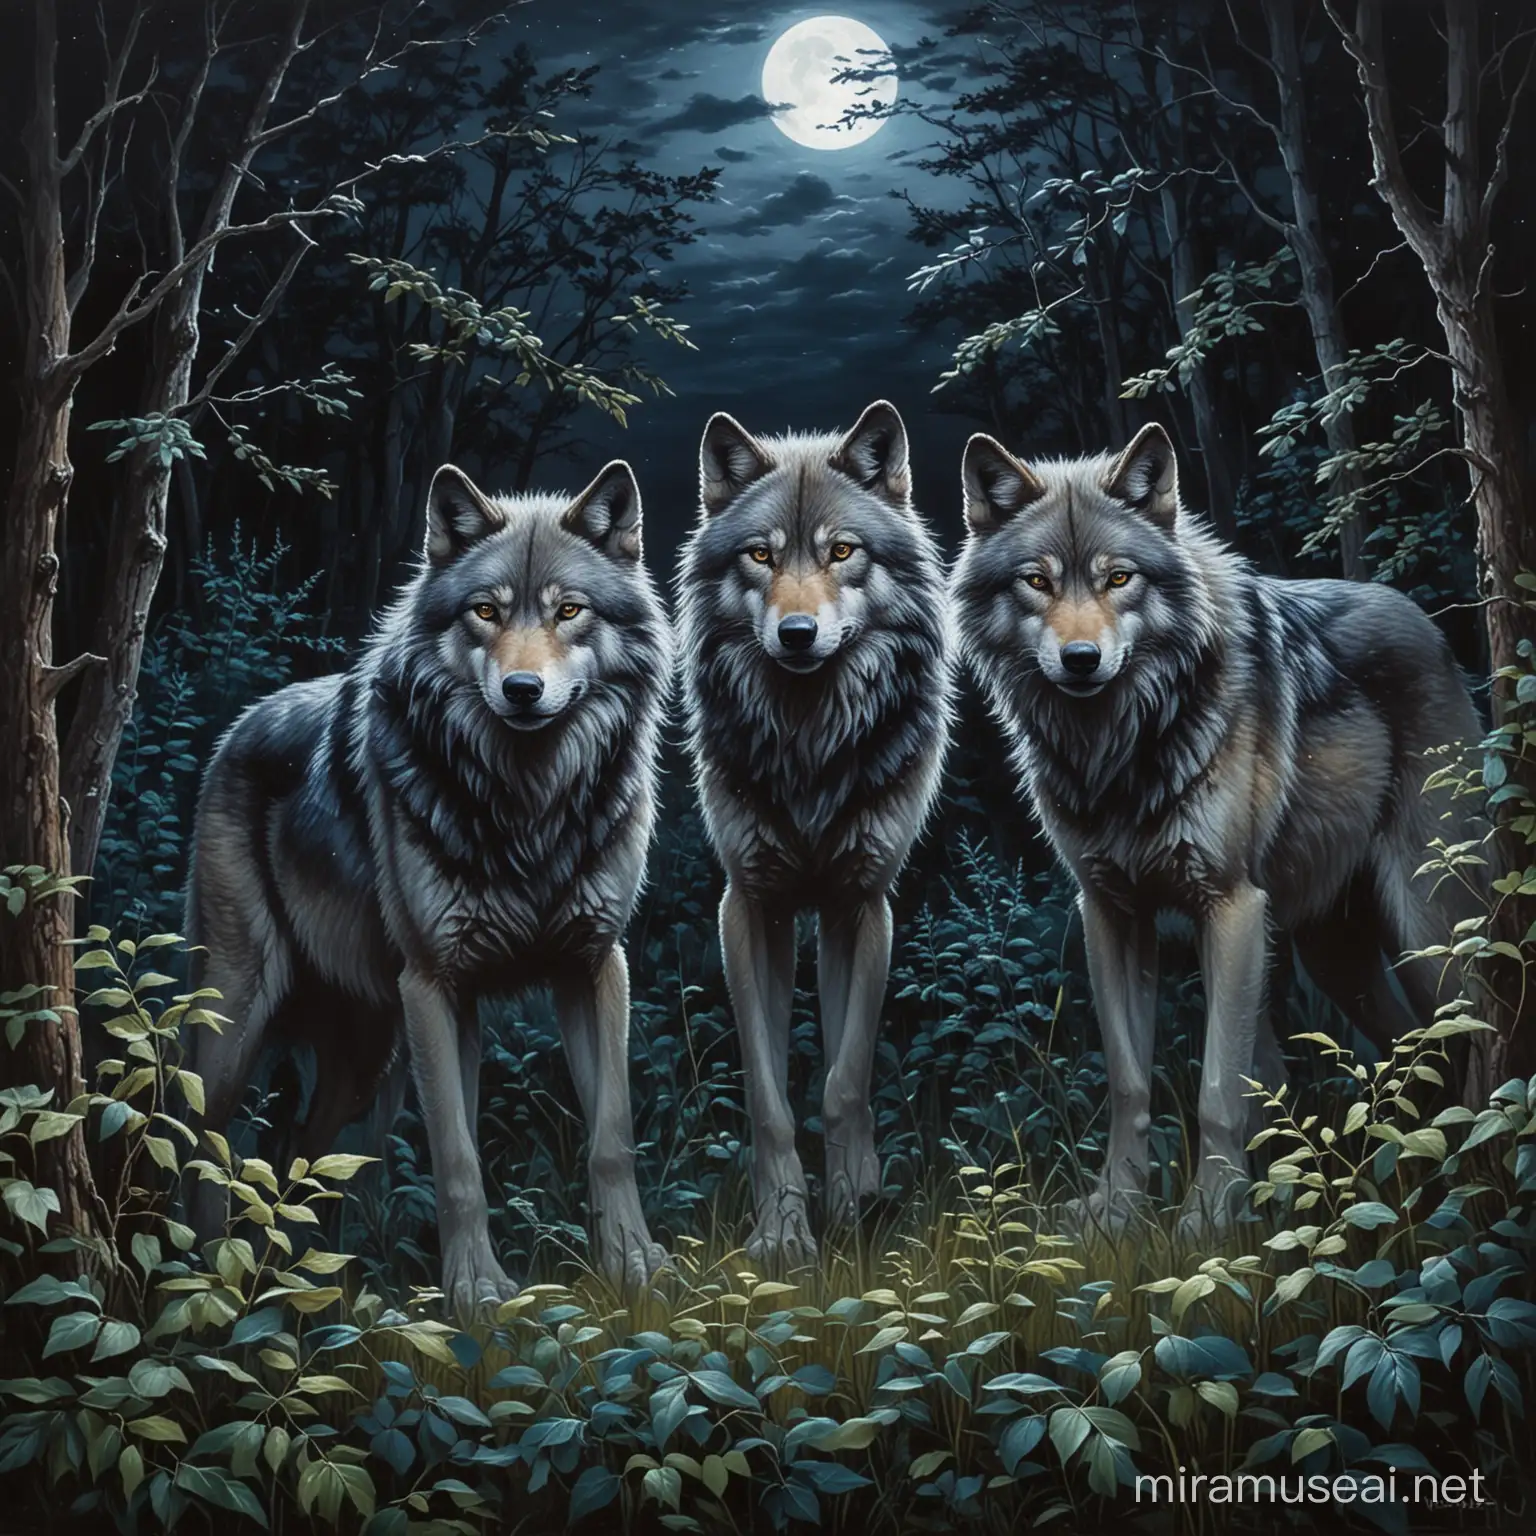 Nighttime Bushes Wolves Oil Painting